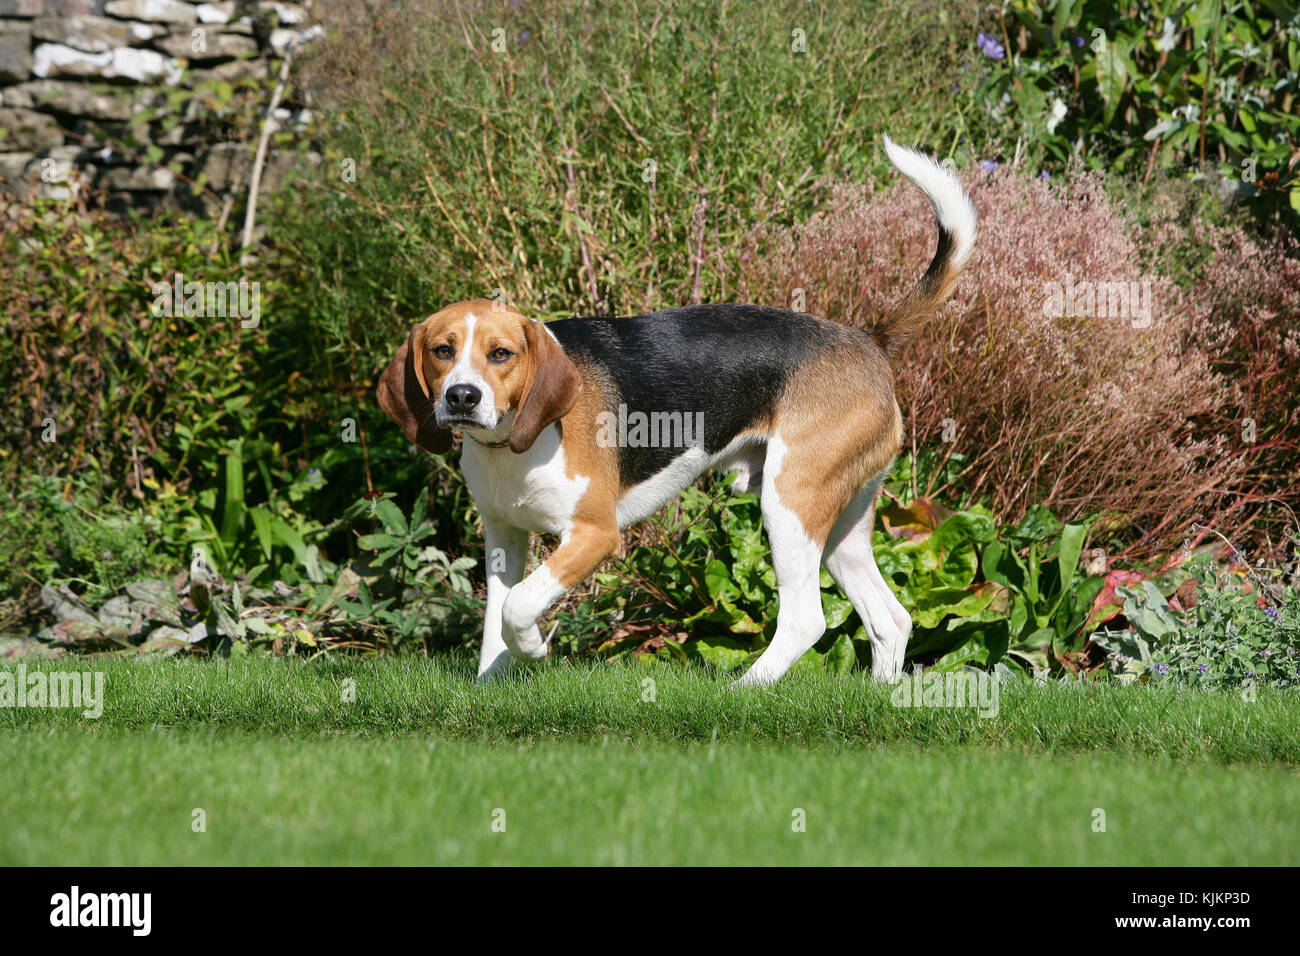 Harrier Beagle Harrier dog walking on grass in garden turning towards camera with flower border in background Stock Photo